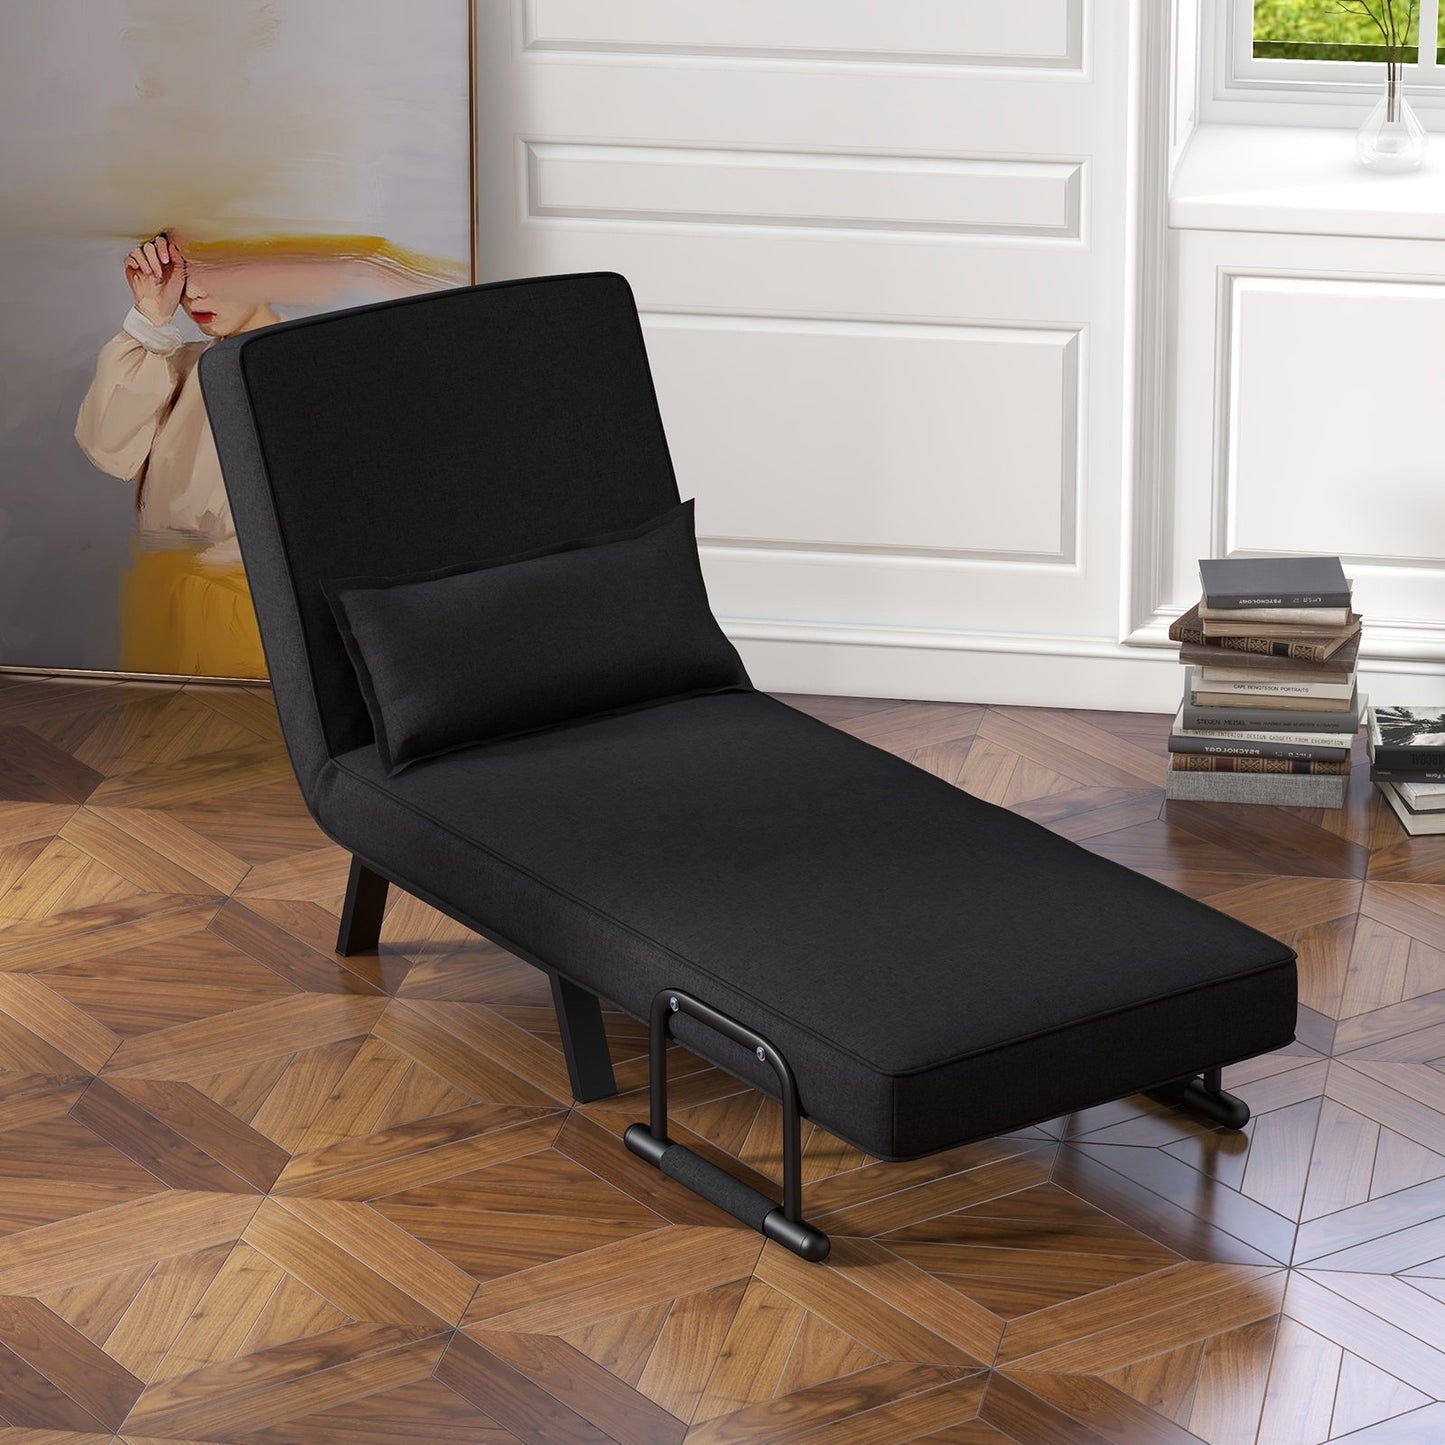 Folding 6 Position Convertible Sleeper Bed Armchair Lounge Couch with Pillow, Black - Gallery Canada